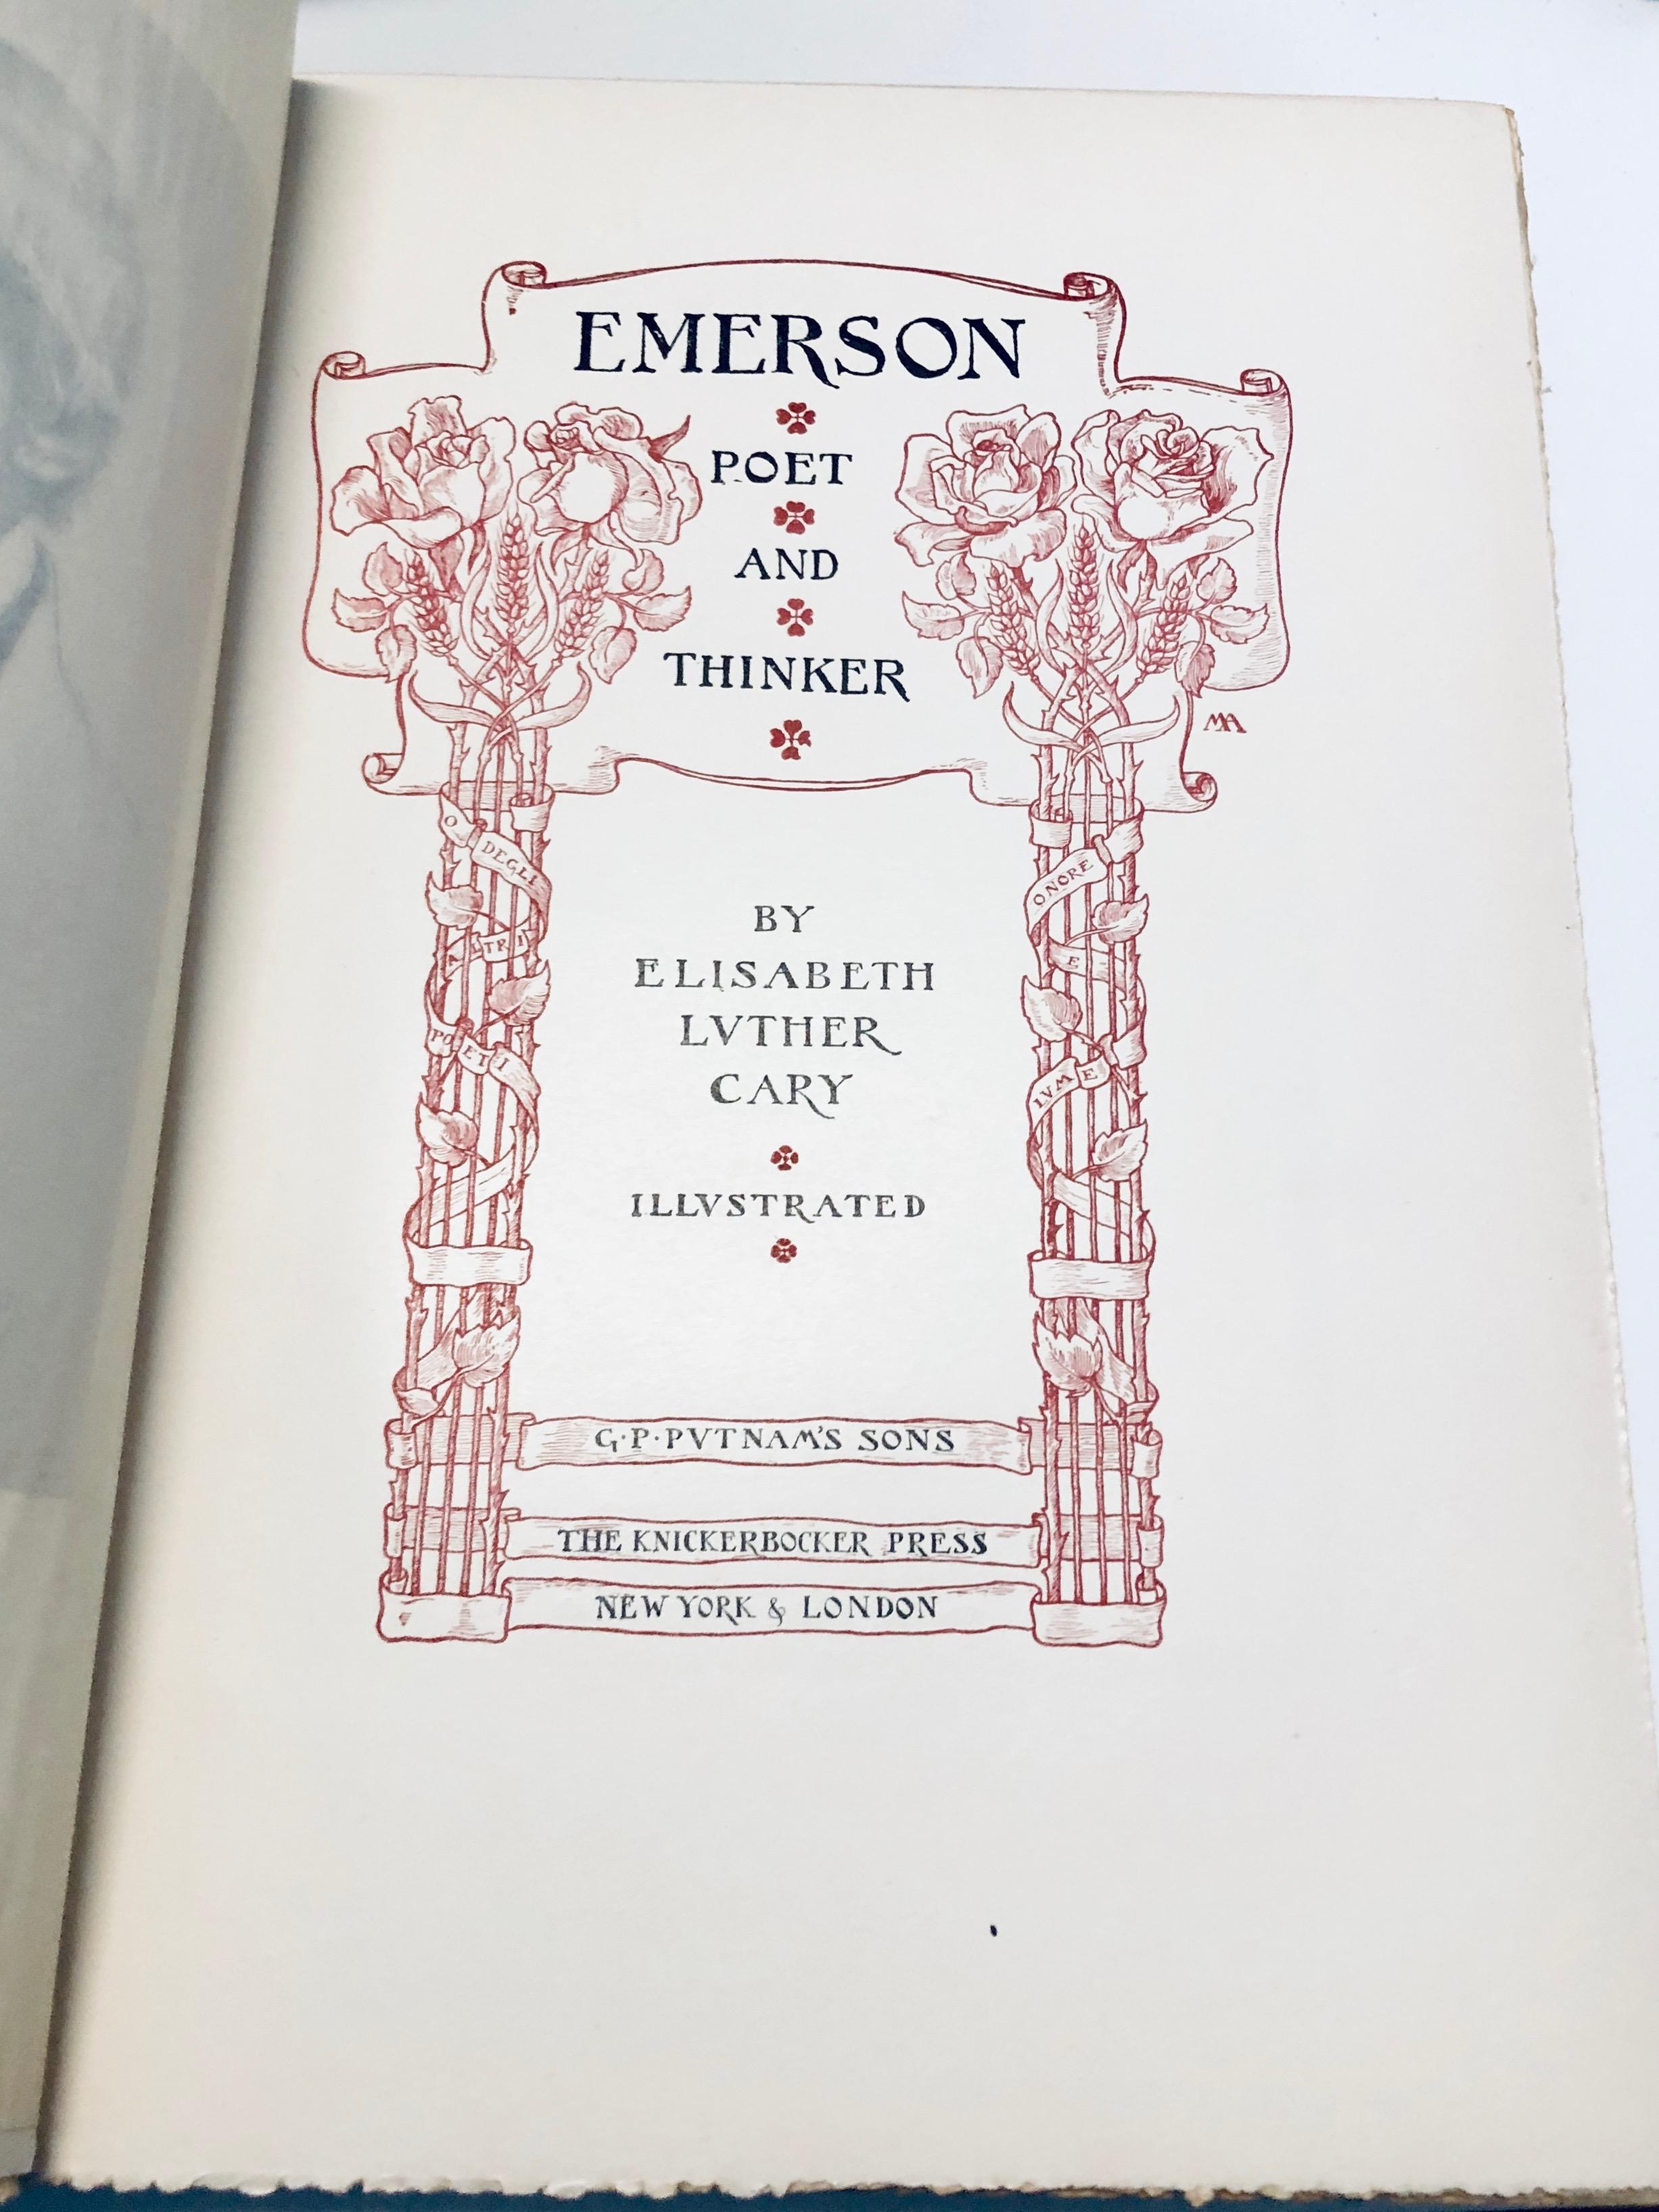 EMERSON: Poet and Thinker by Elisabeth Luther Cary (1904)